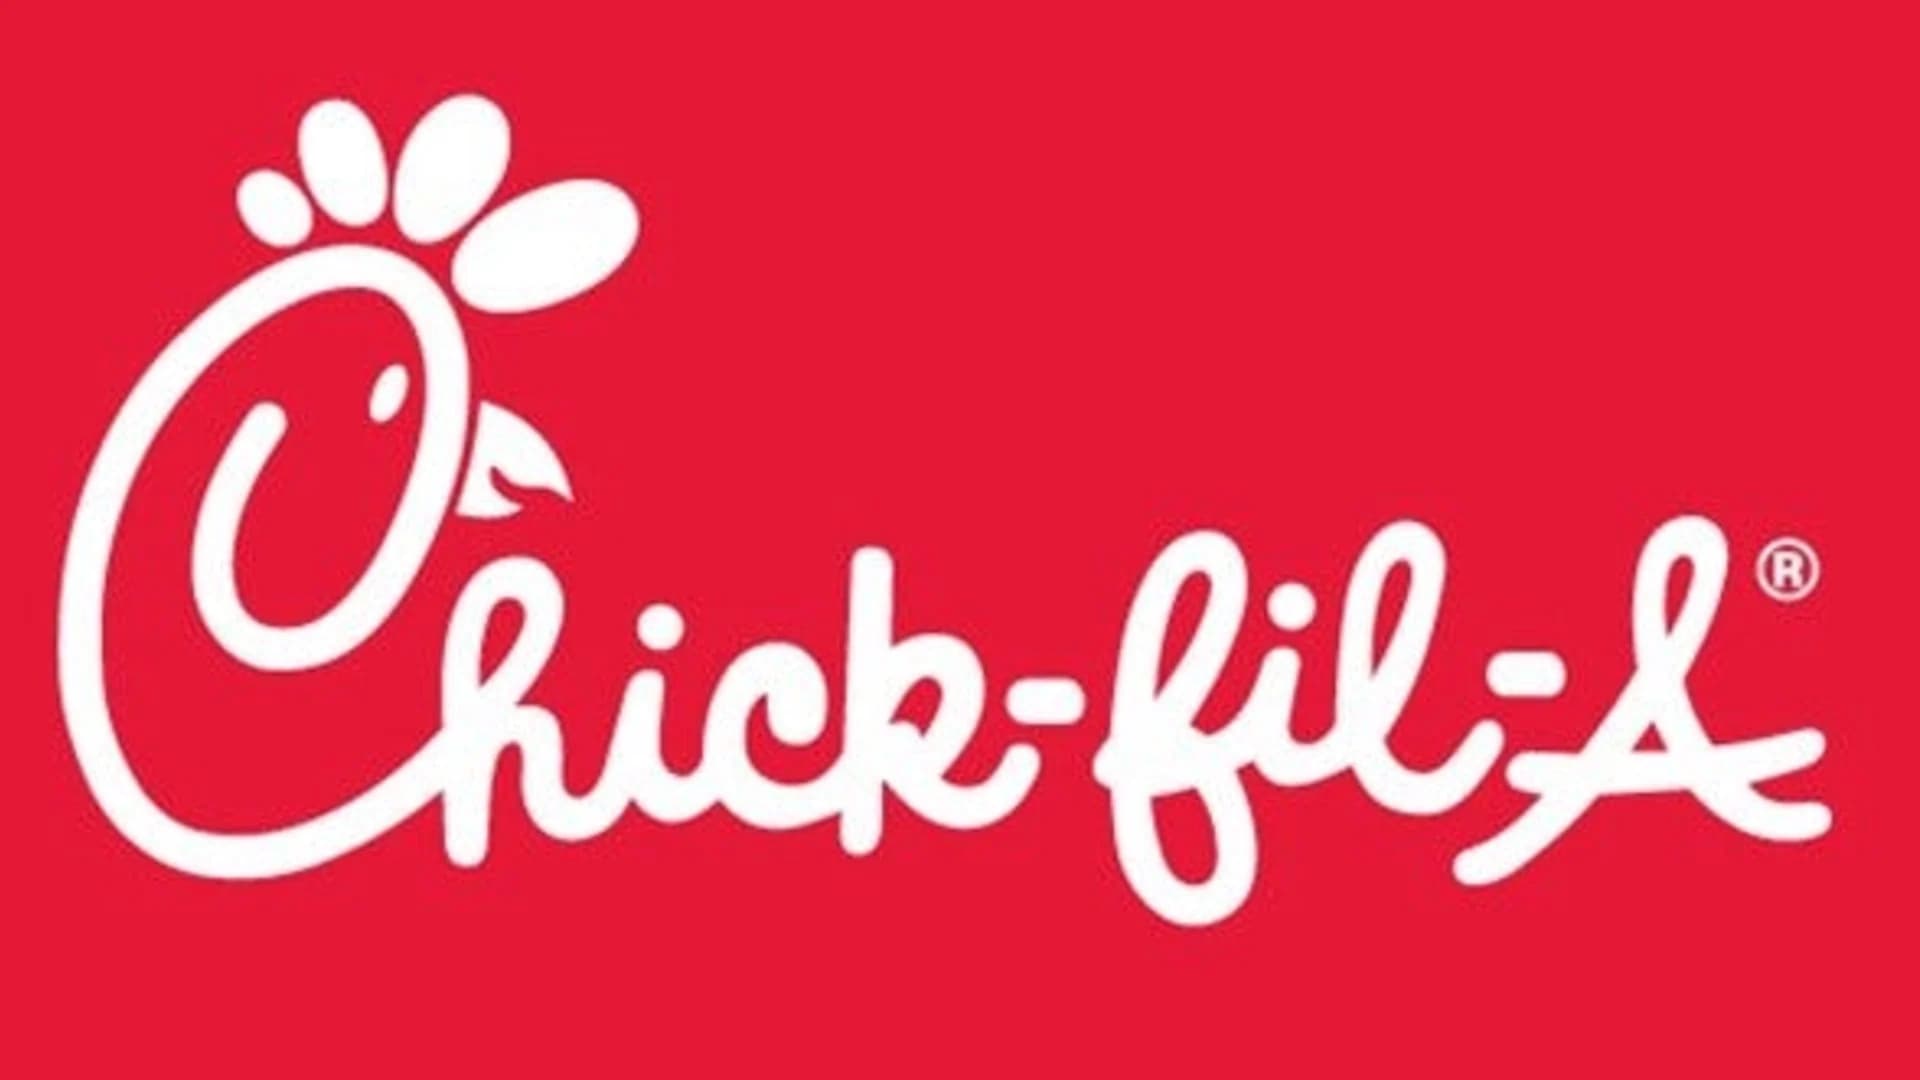 Report: Chick-fil-A location approved for New Jersey town